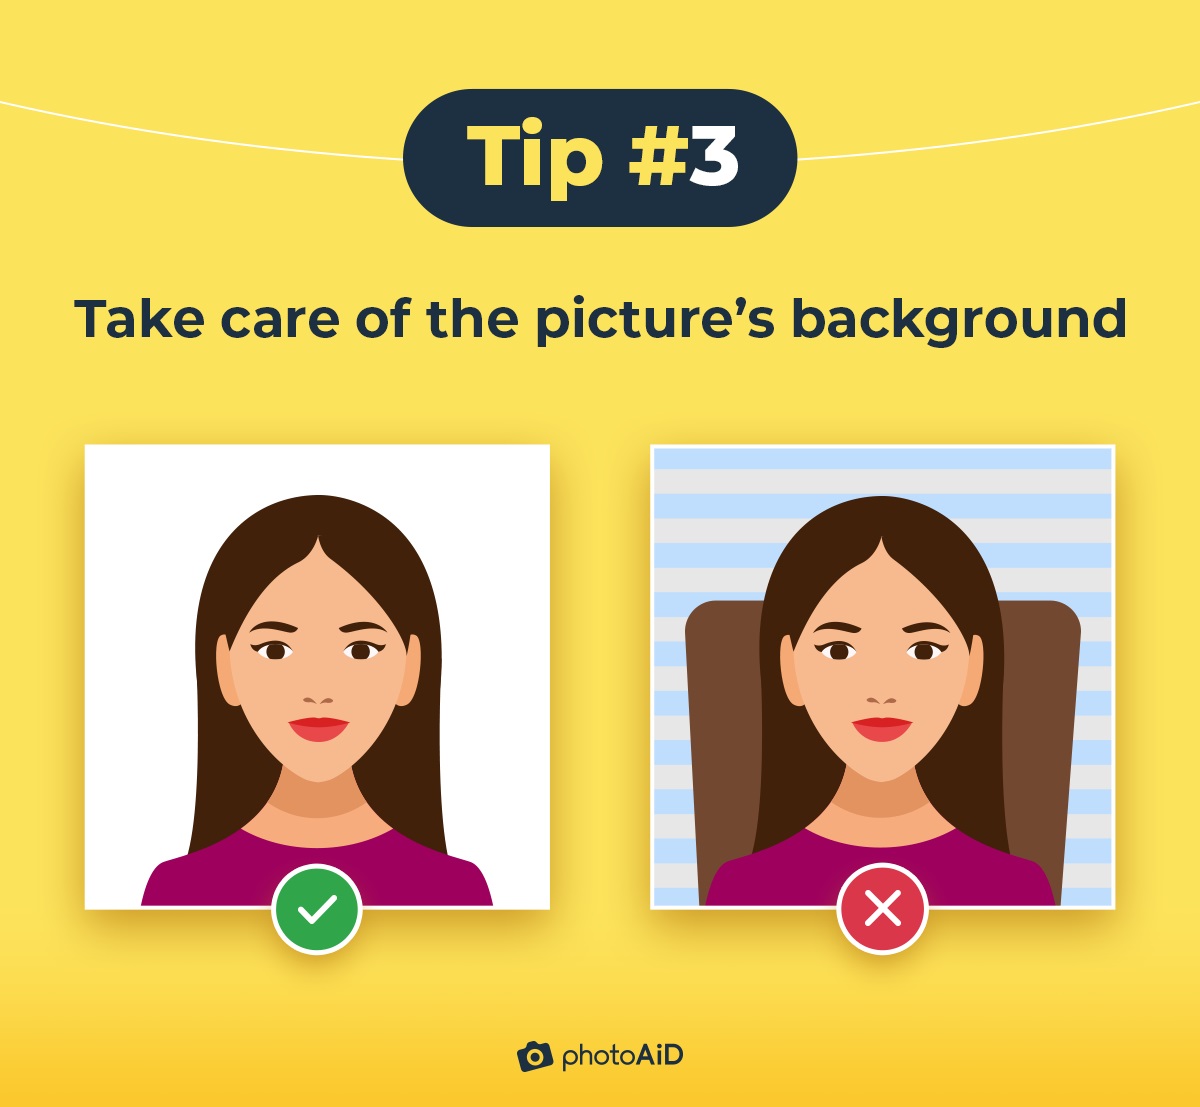 A LinkedIn profile picture tip about background.